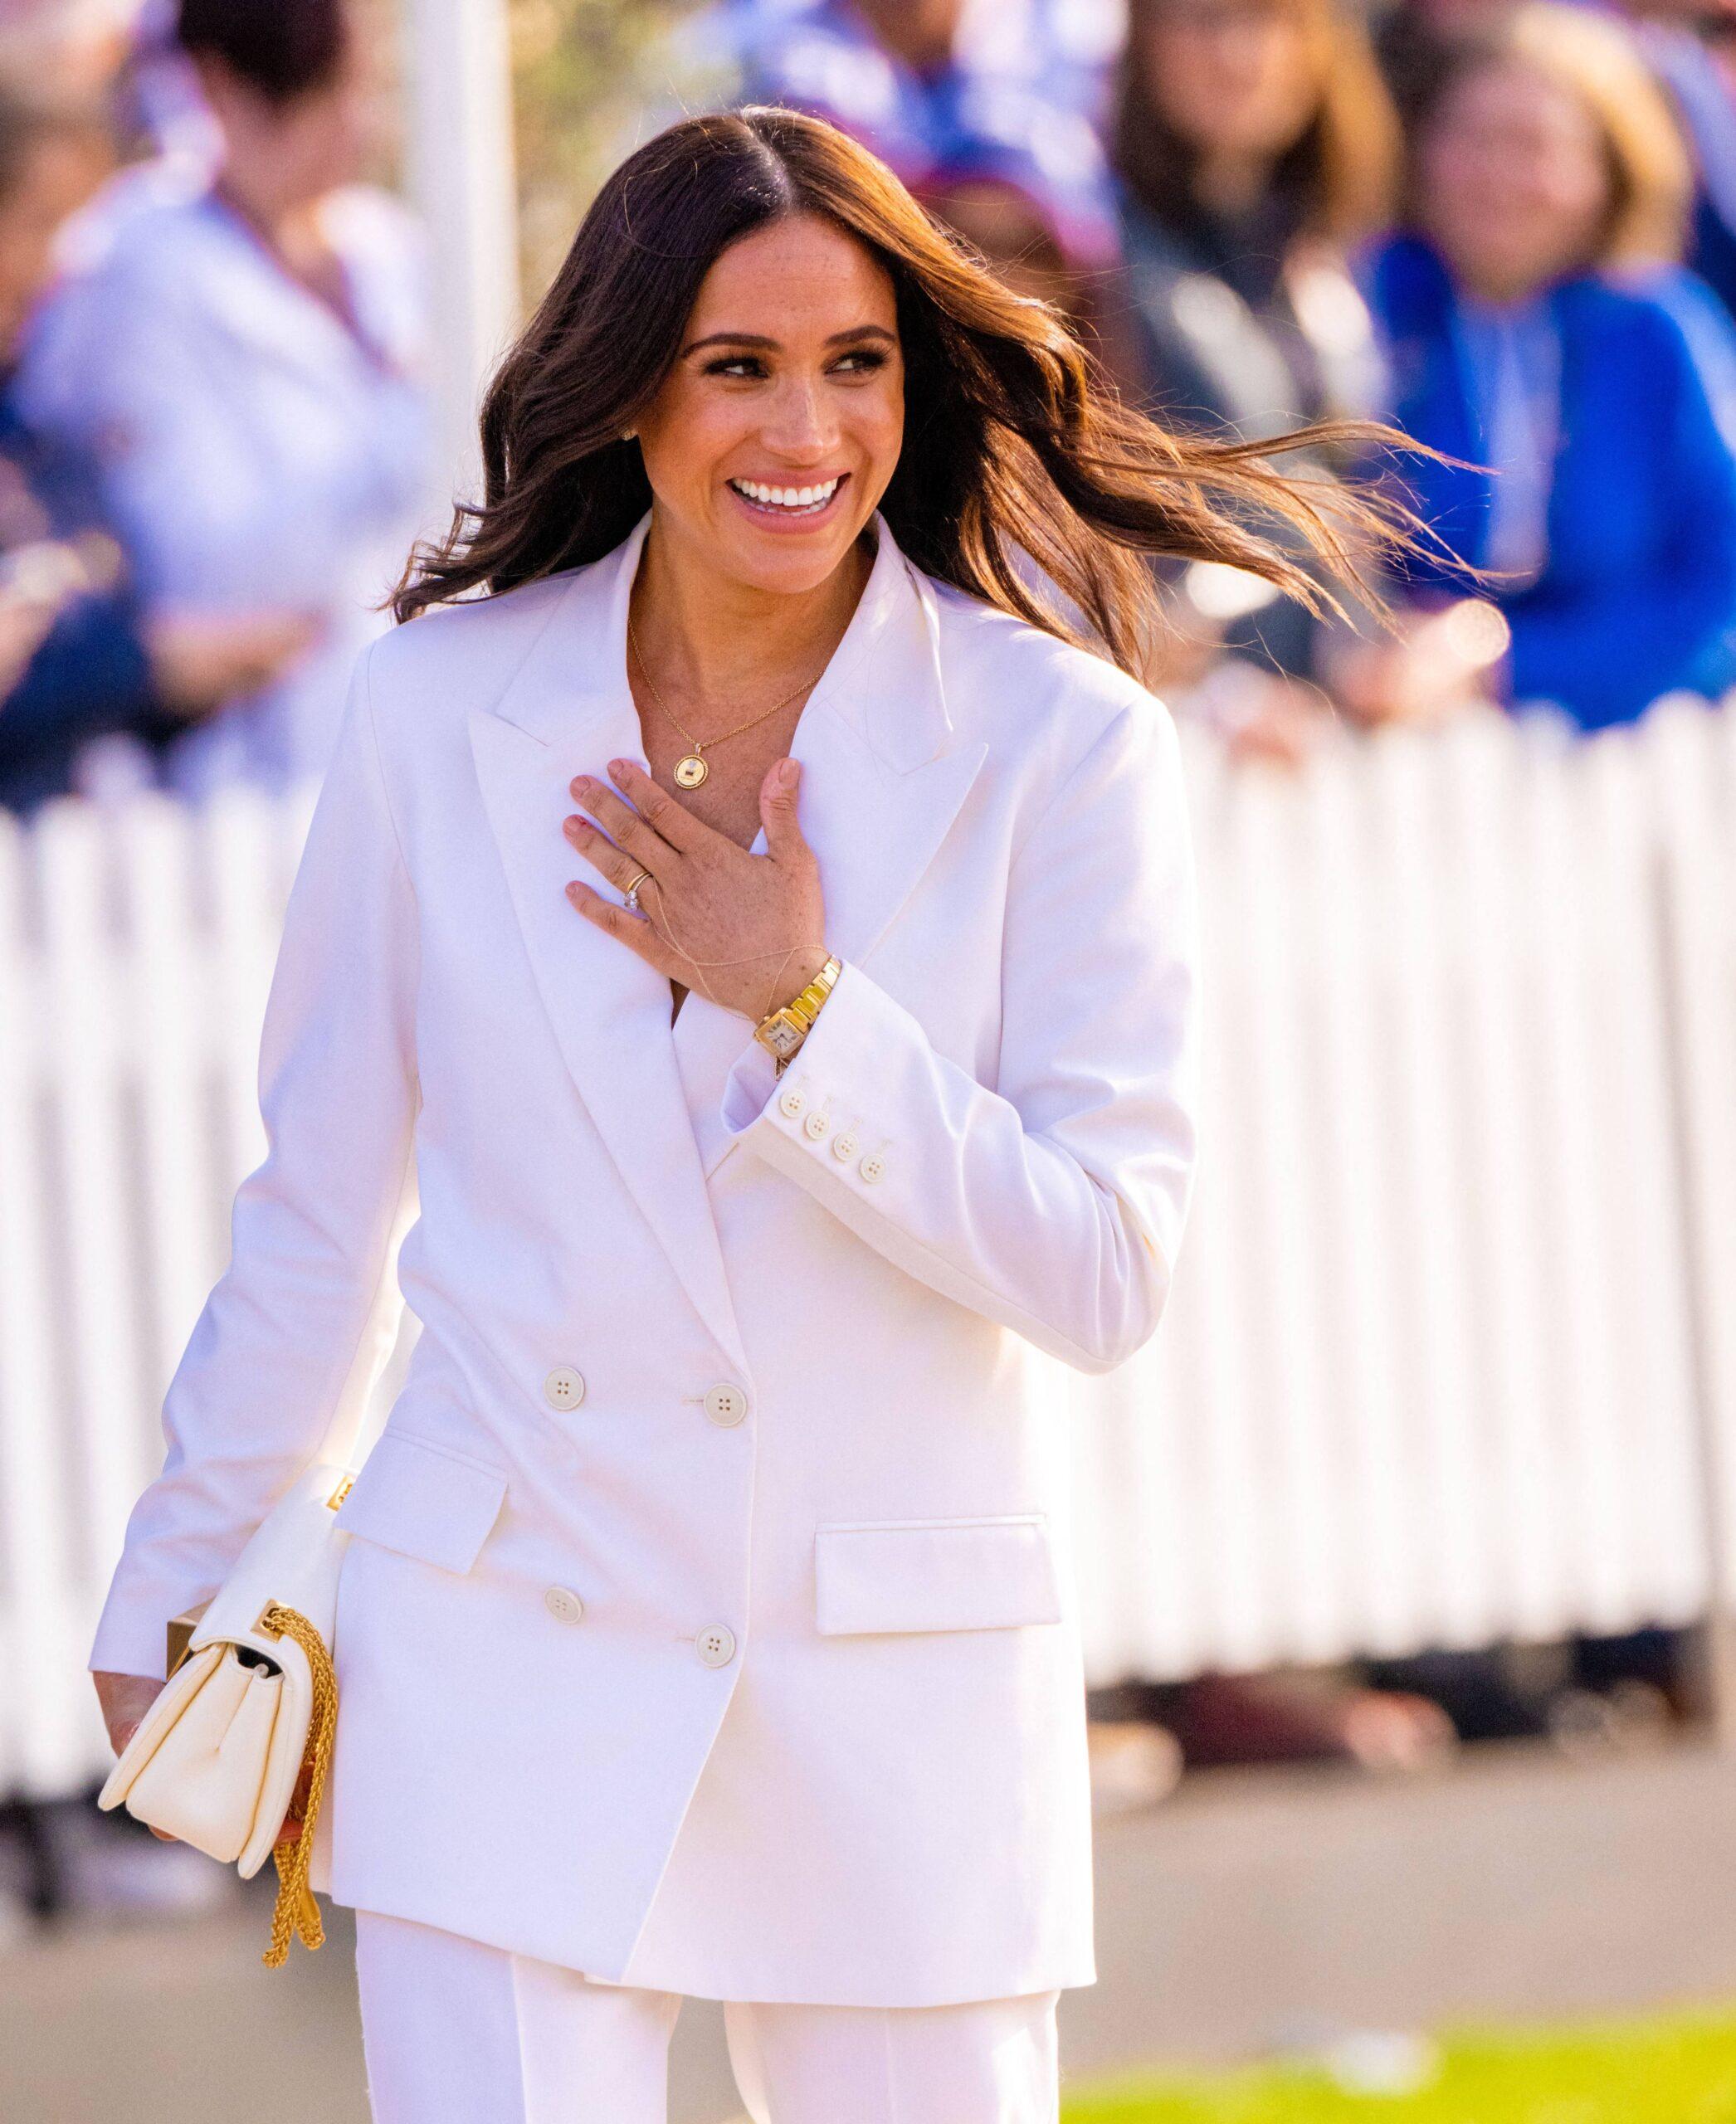 Meghan Markle is smiling with her left hand on her heart